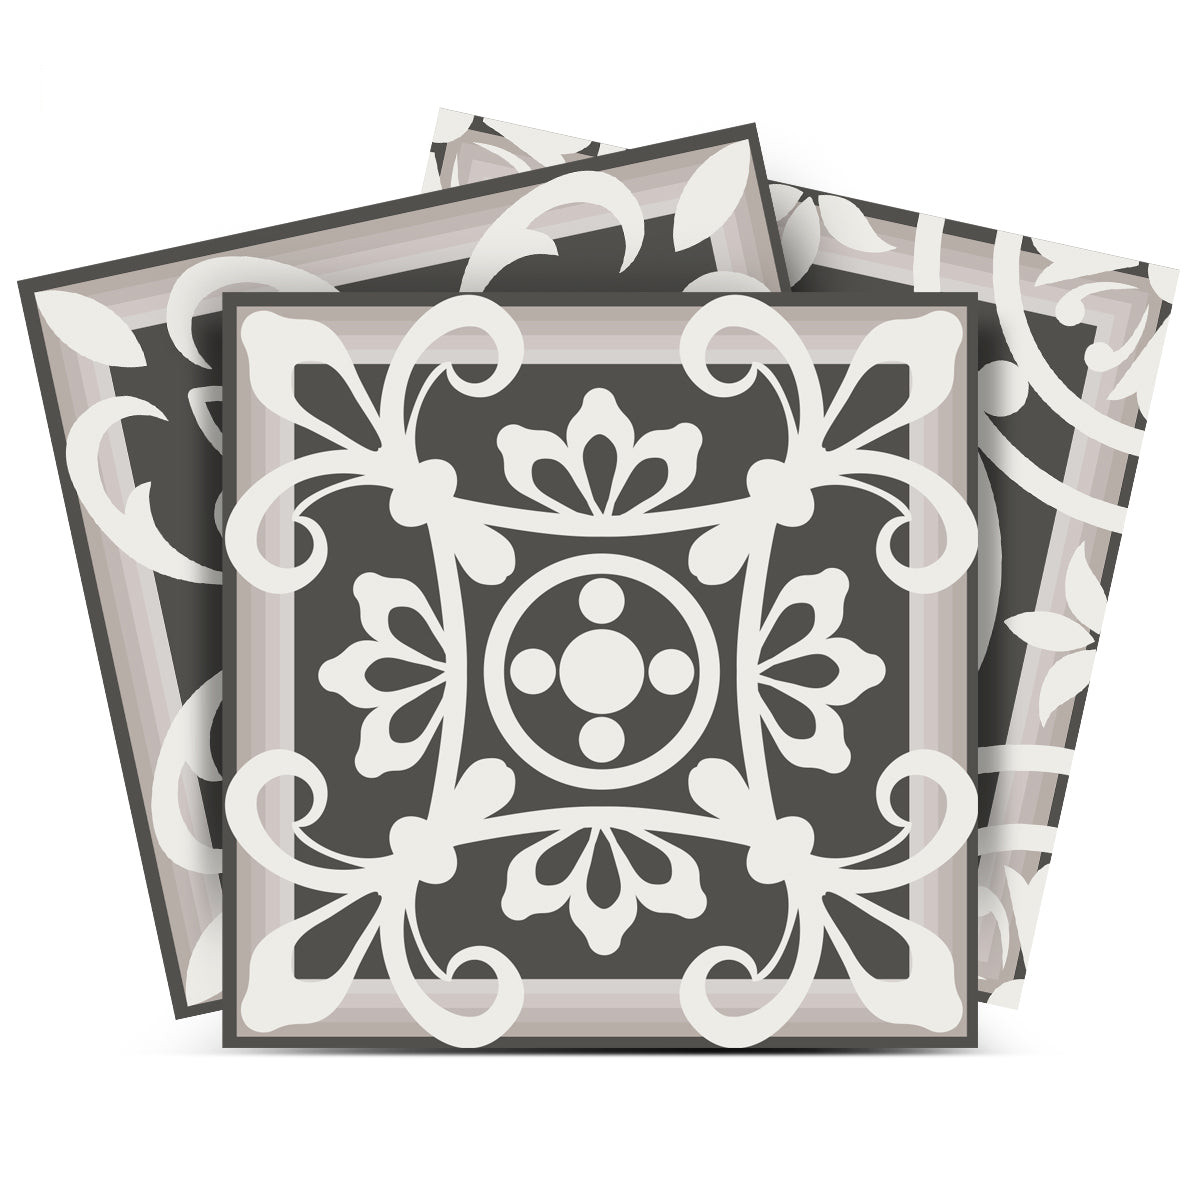 8" x 8" Wood Brown and White Mosaic Peel and Stick Removable Tiles-400483-1